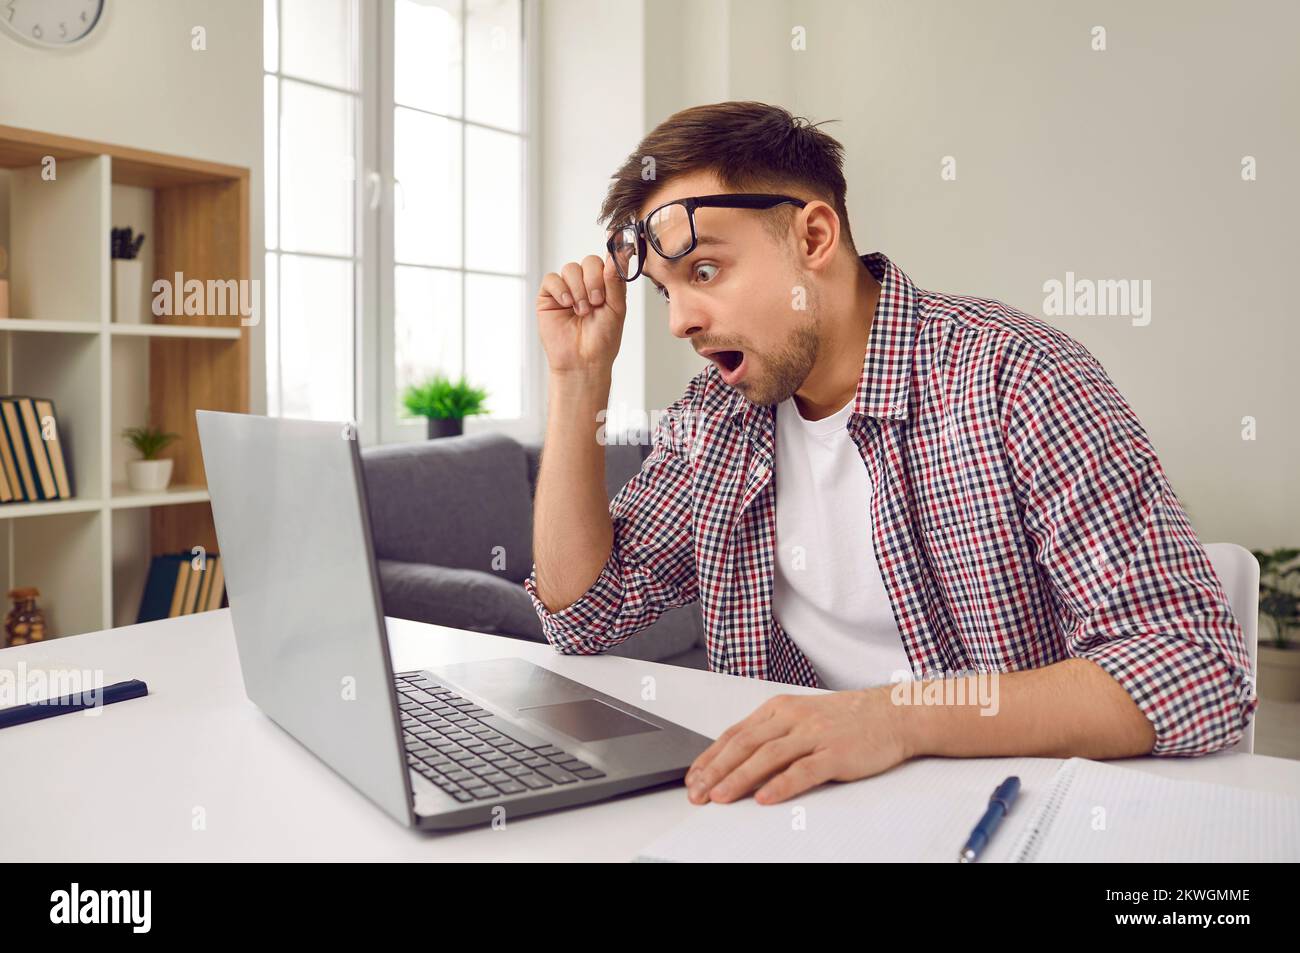 Man is looking at laptop screen with shocked, confused and scared expression on his face. Stock Photo